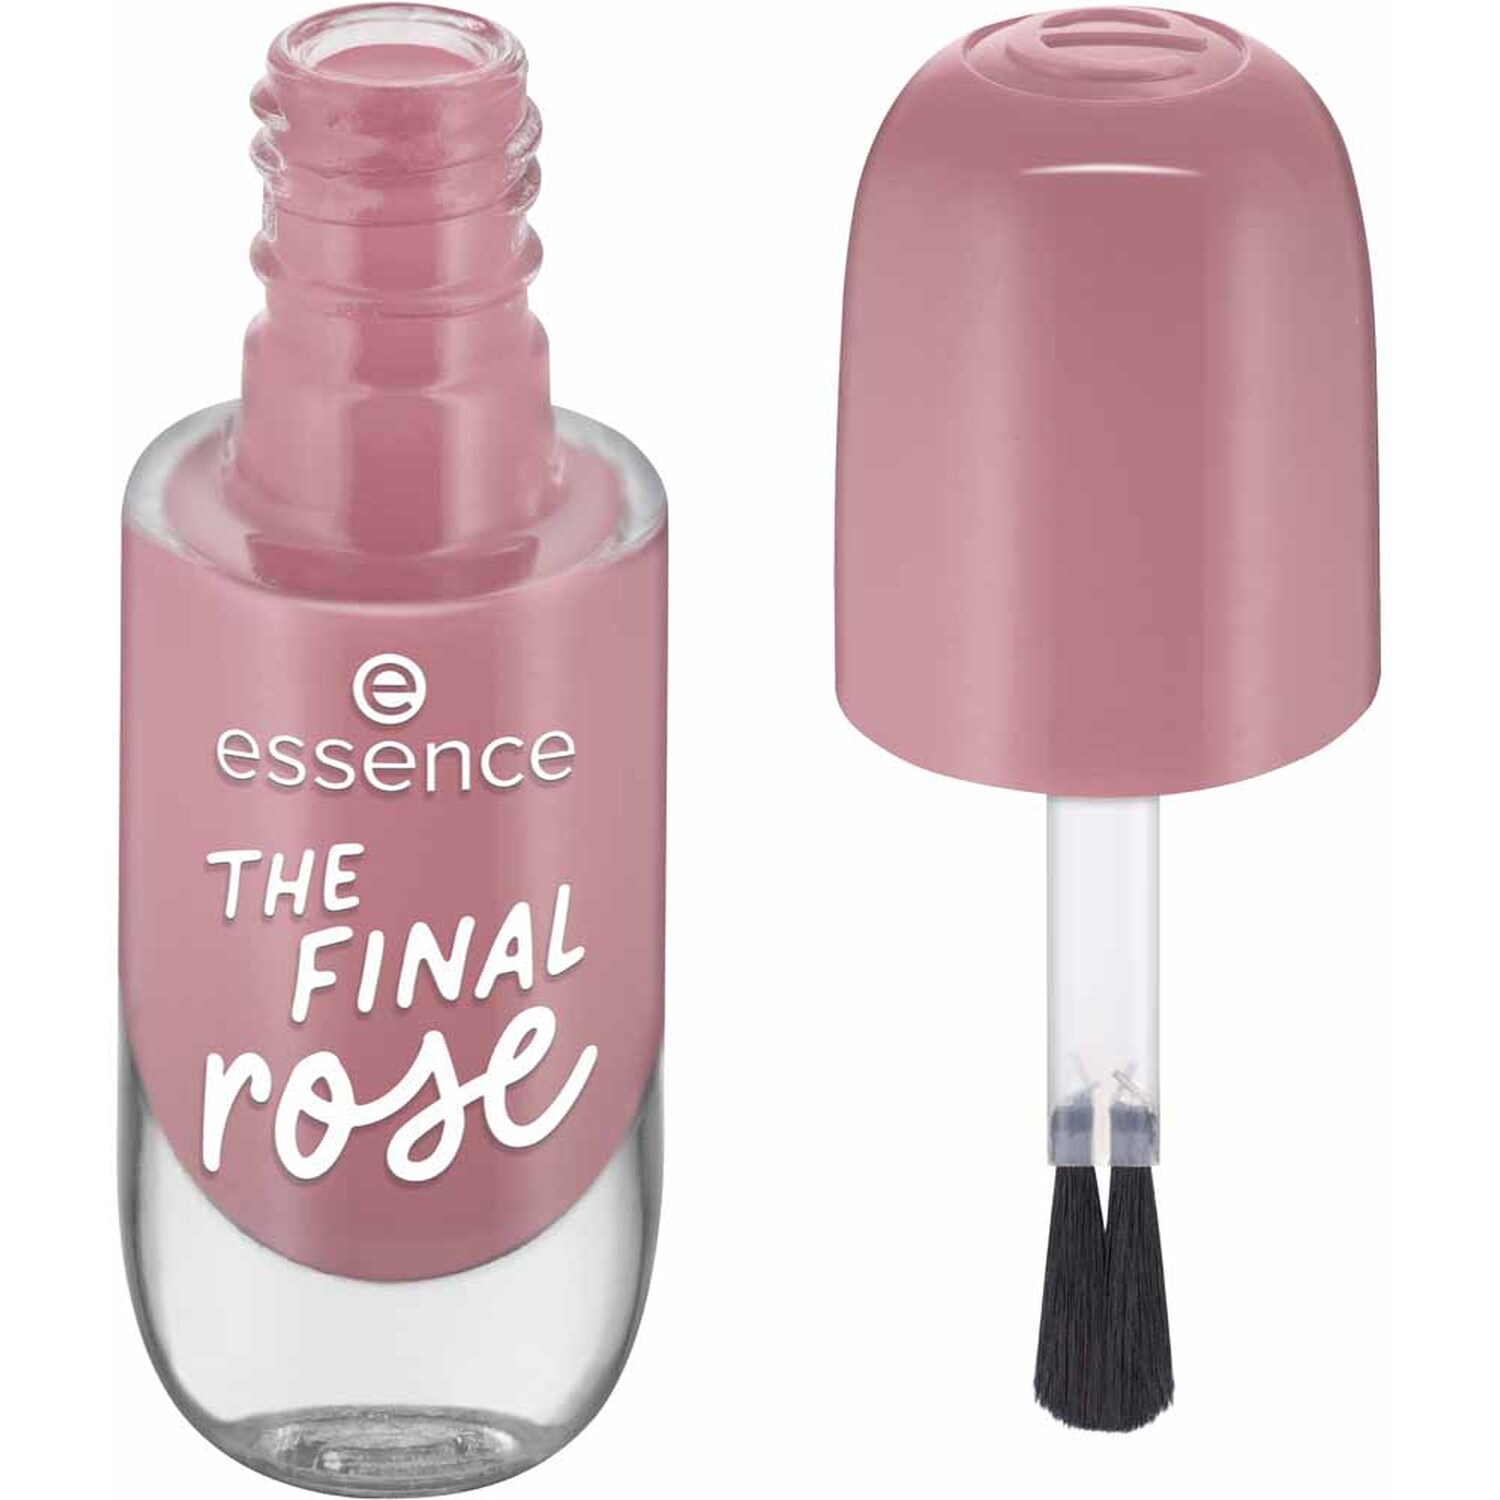 essence Gel Nail Colour - The Final Rose Image